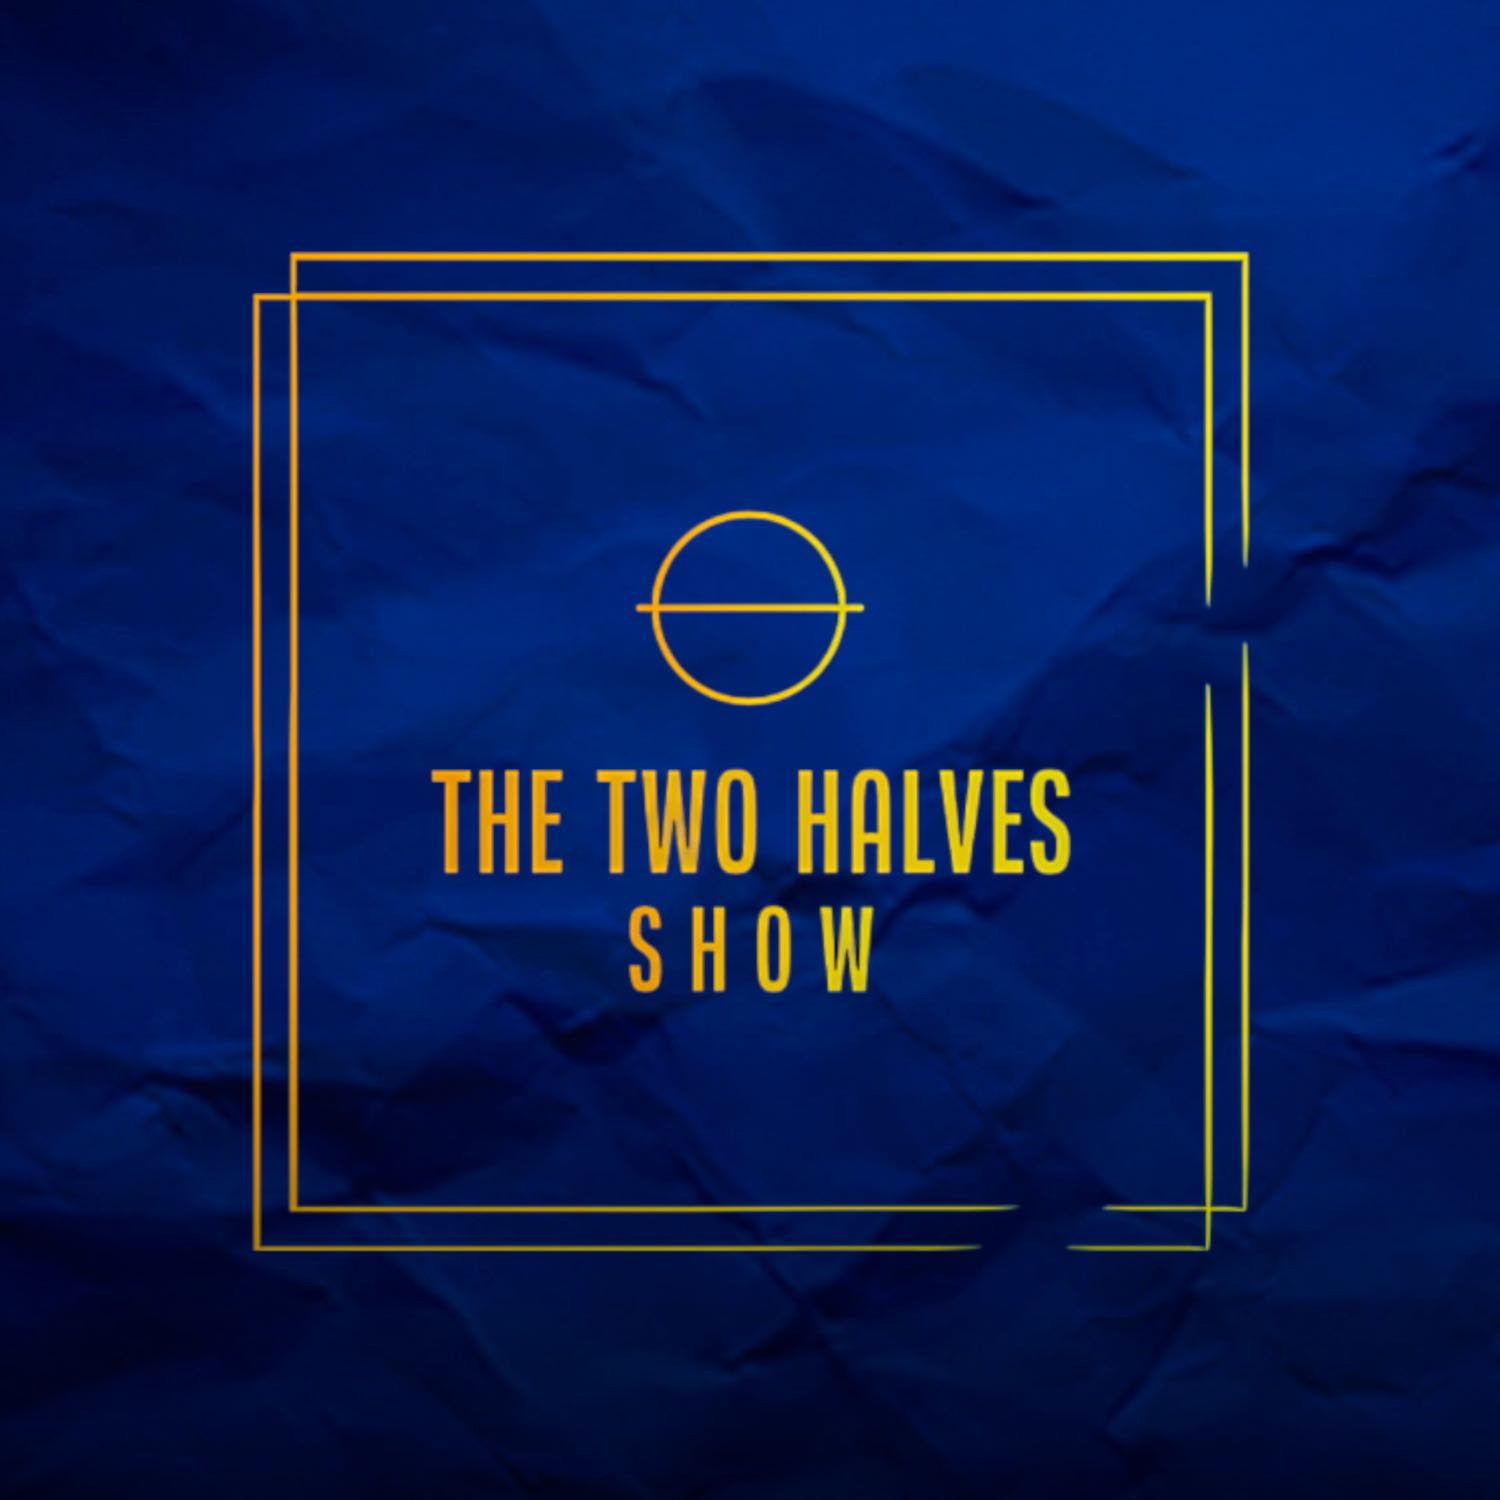 The Two Halves Show - The Premier League Returns | Mahomes Closes in on the MVP | Luka Doncic Shines